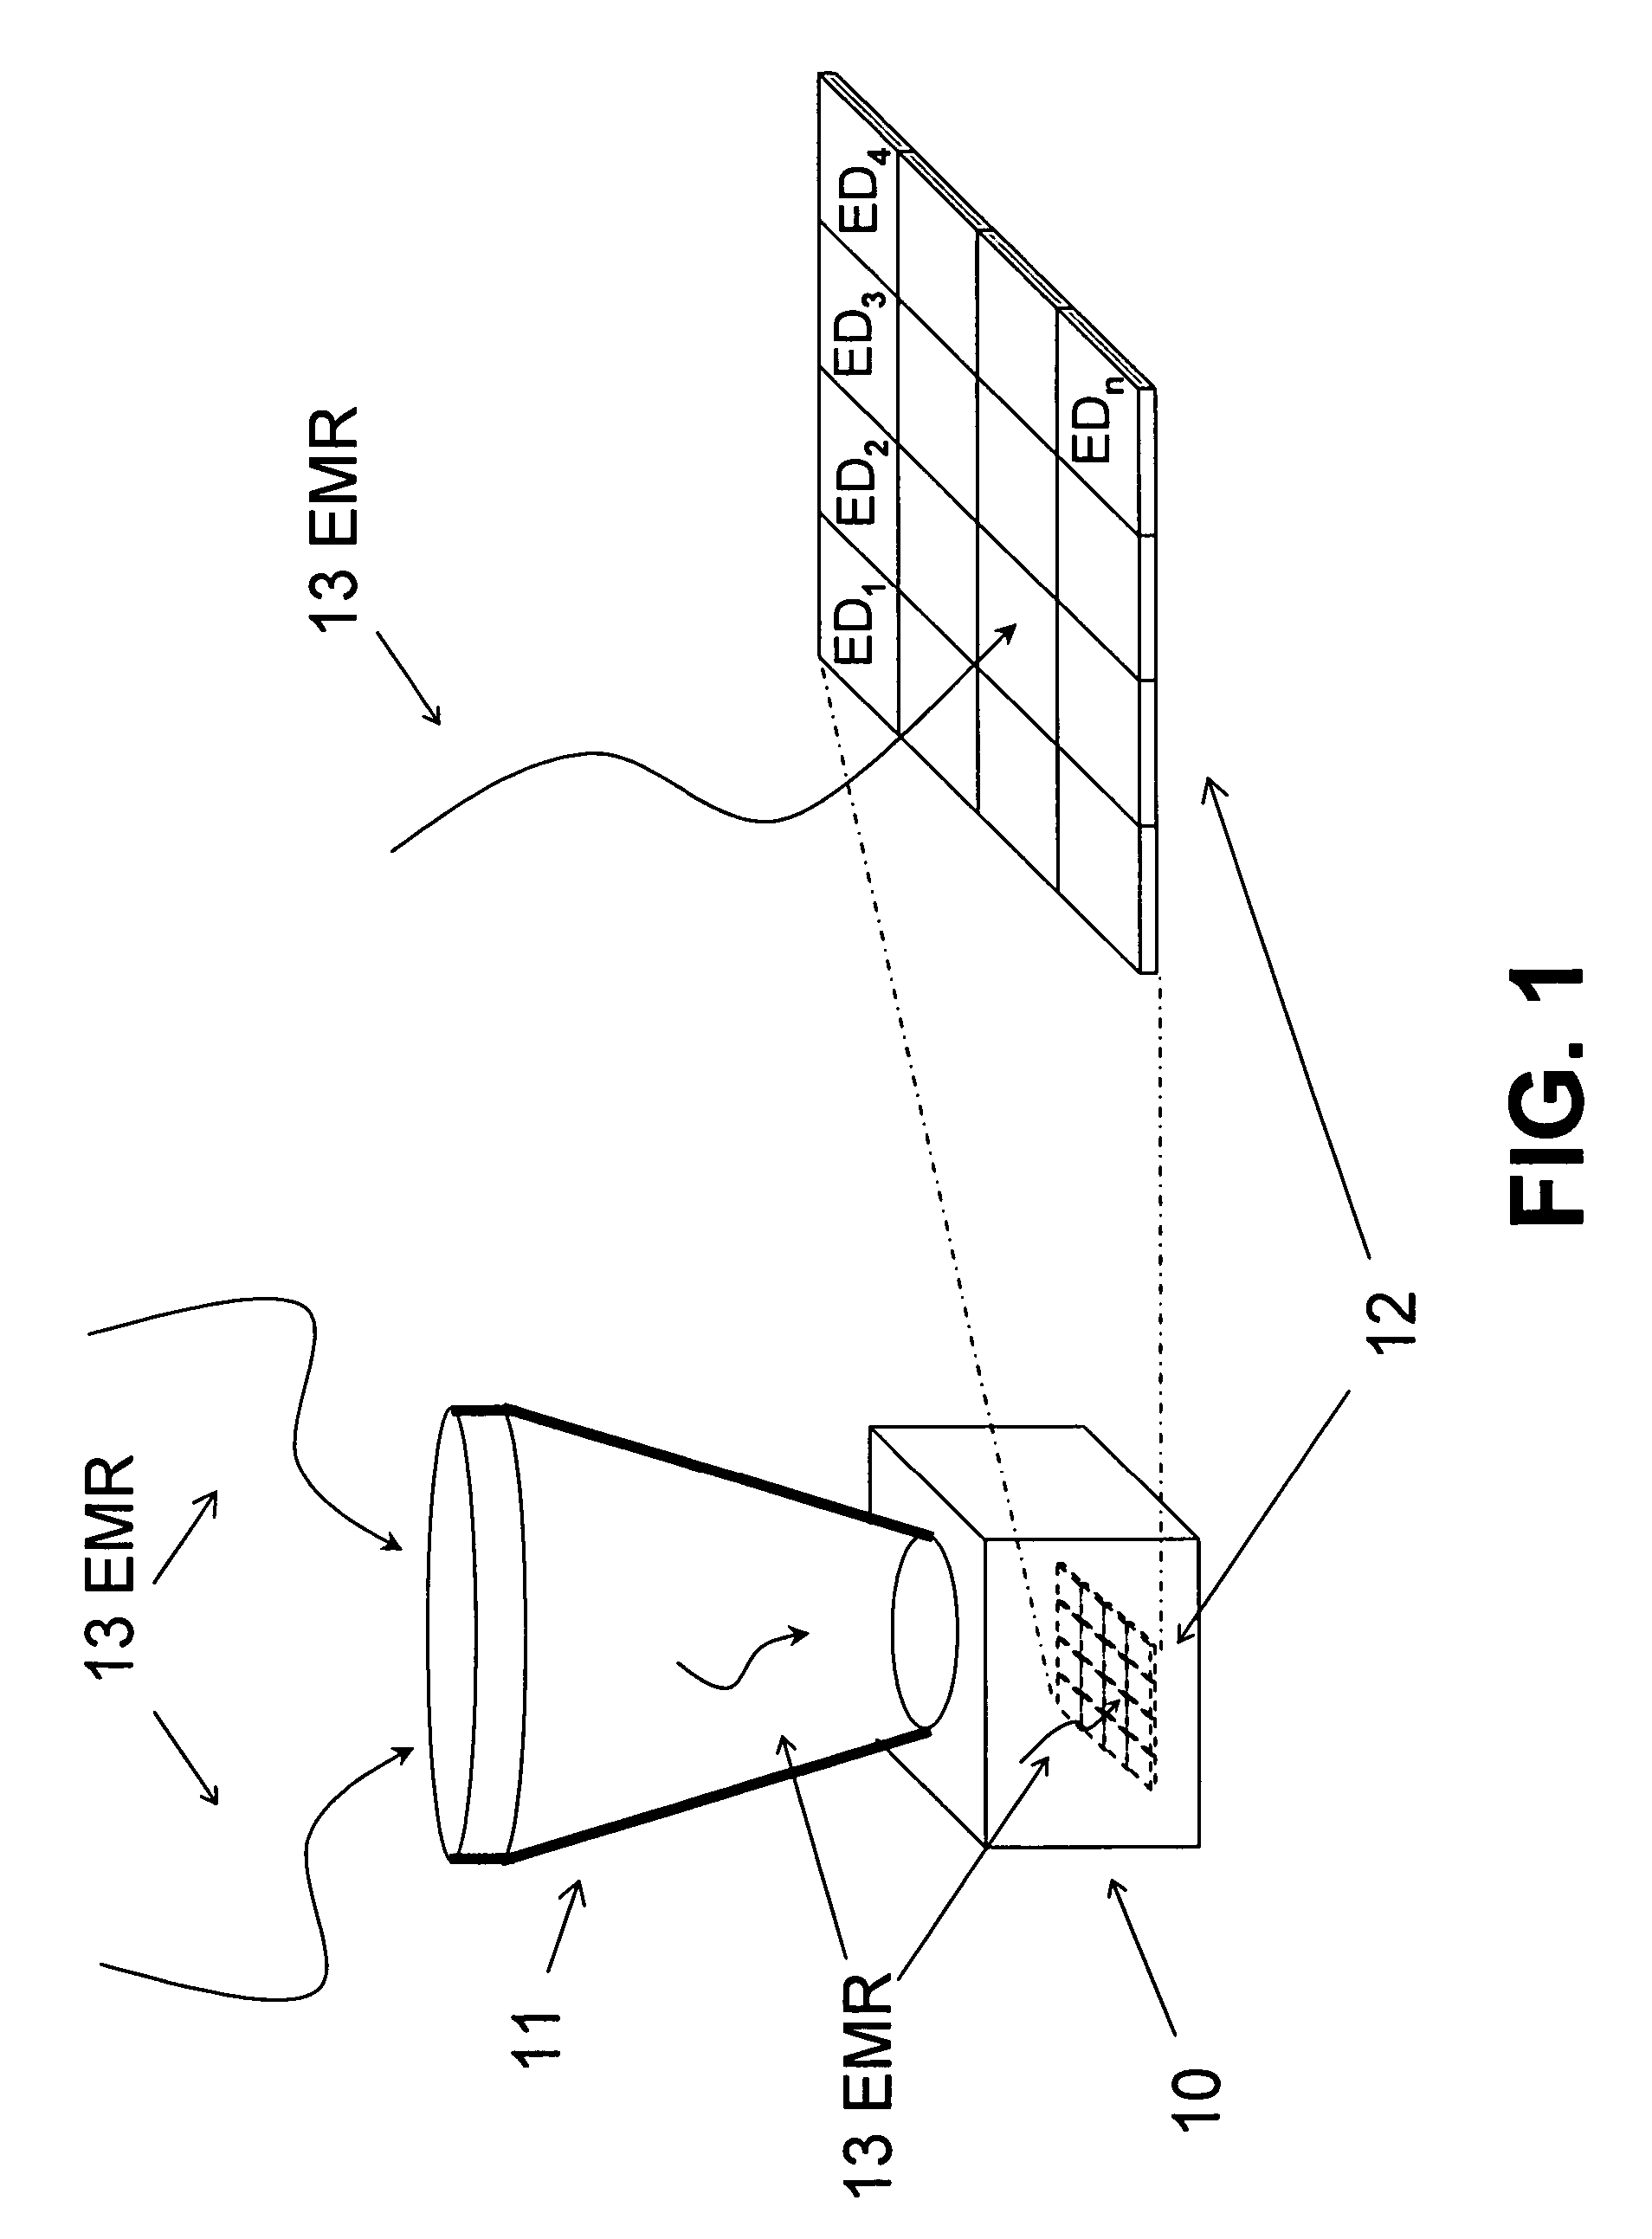 Focal plane array incorporating ultra-small resonant structures